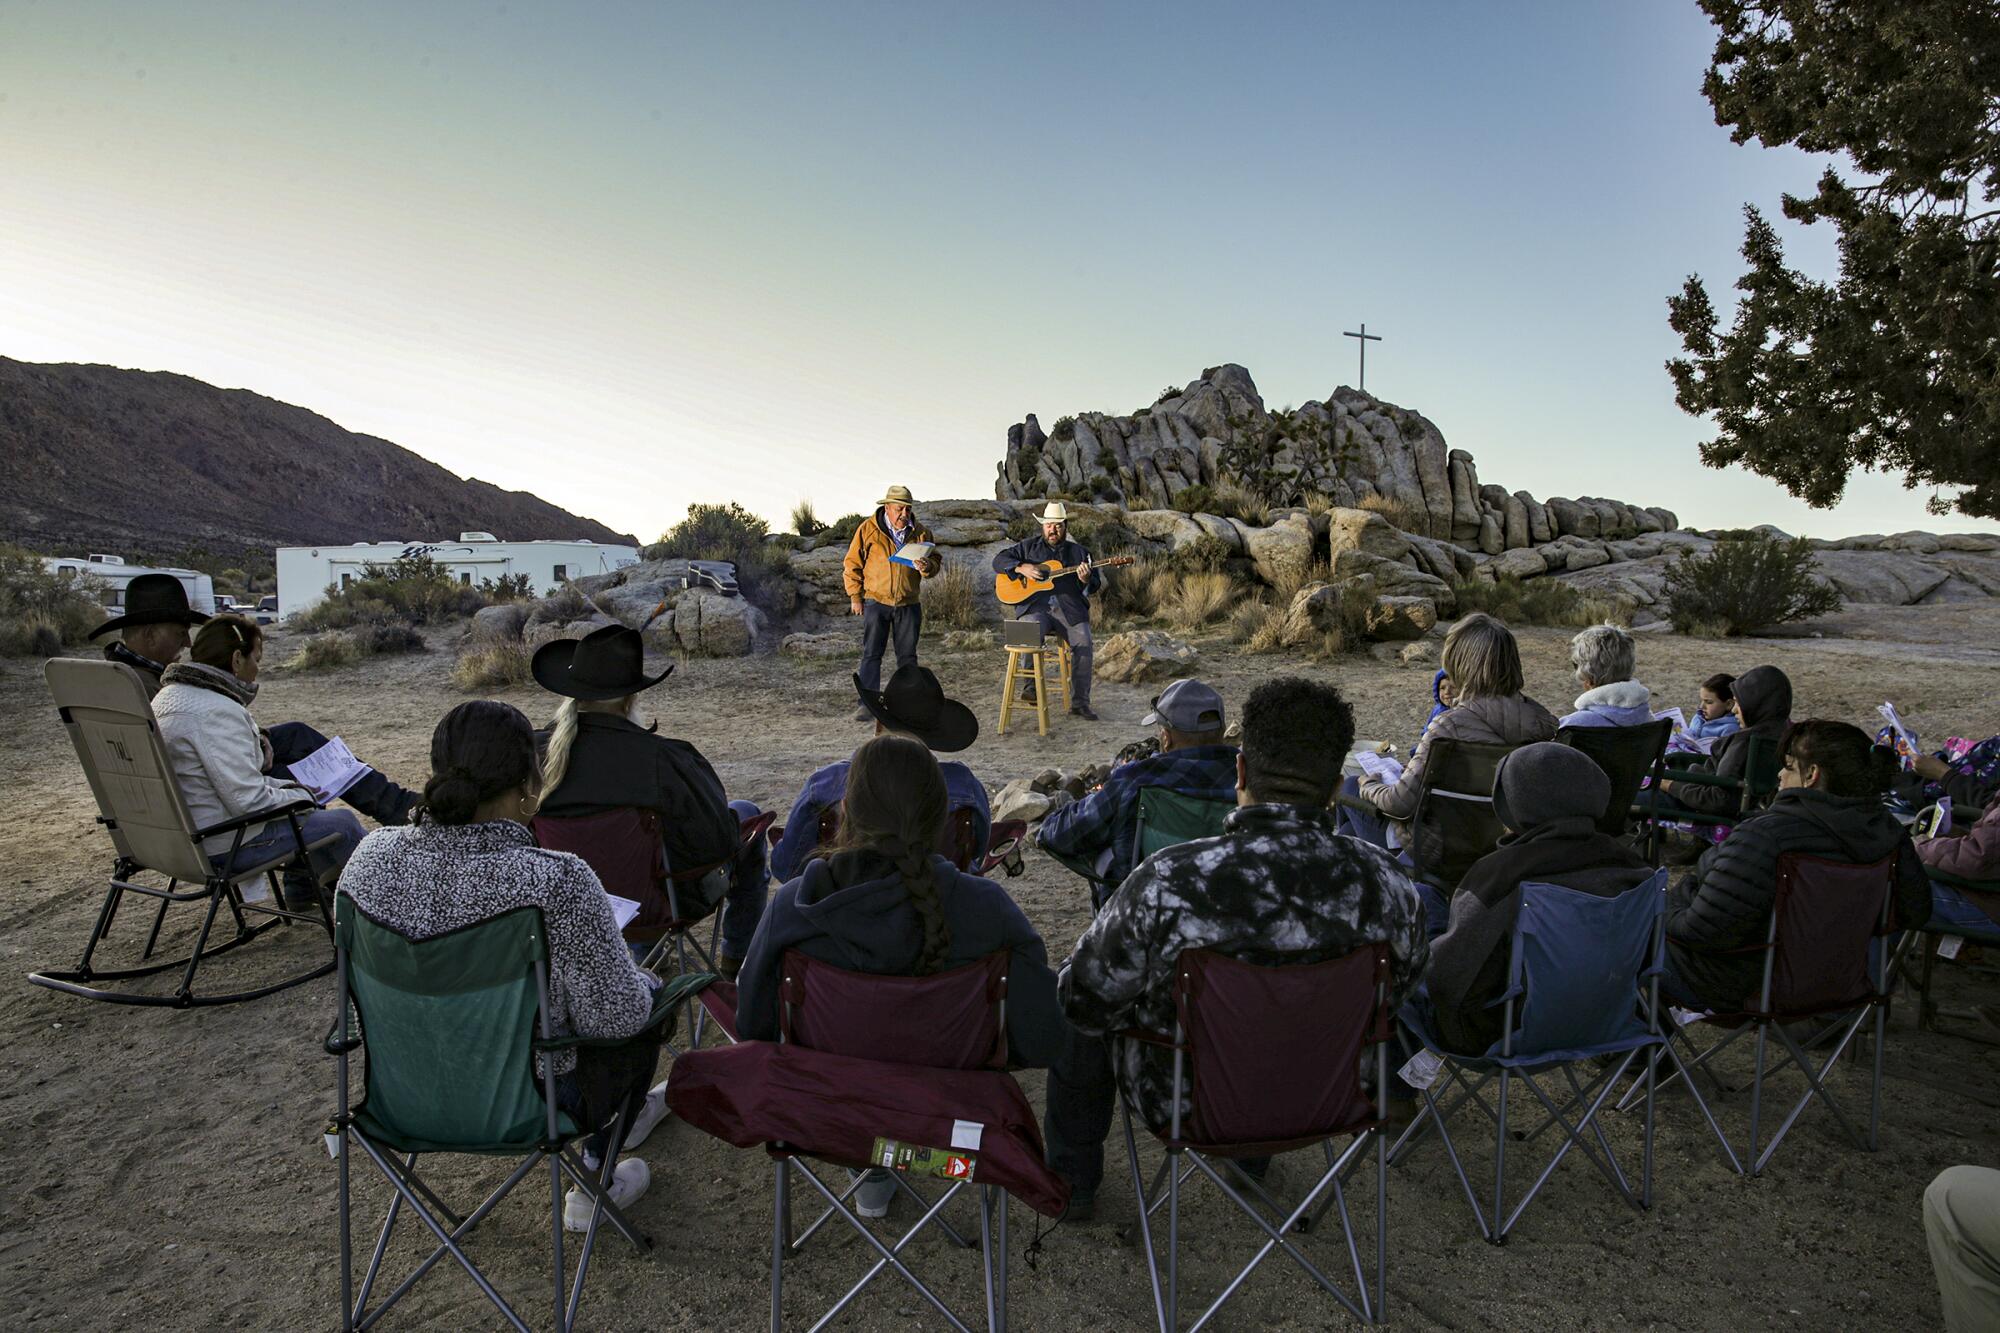 People sit in chairs in the desert to watch two people sing.